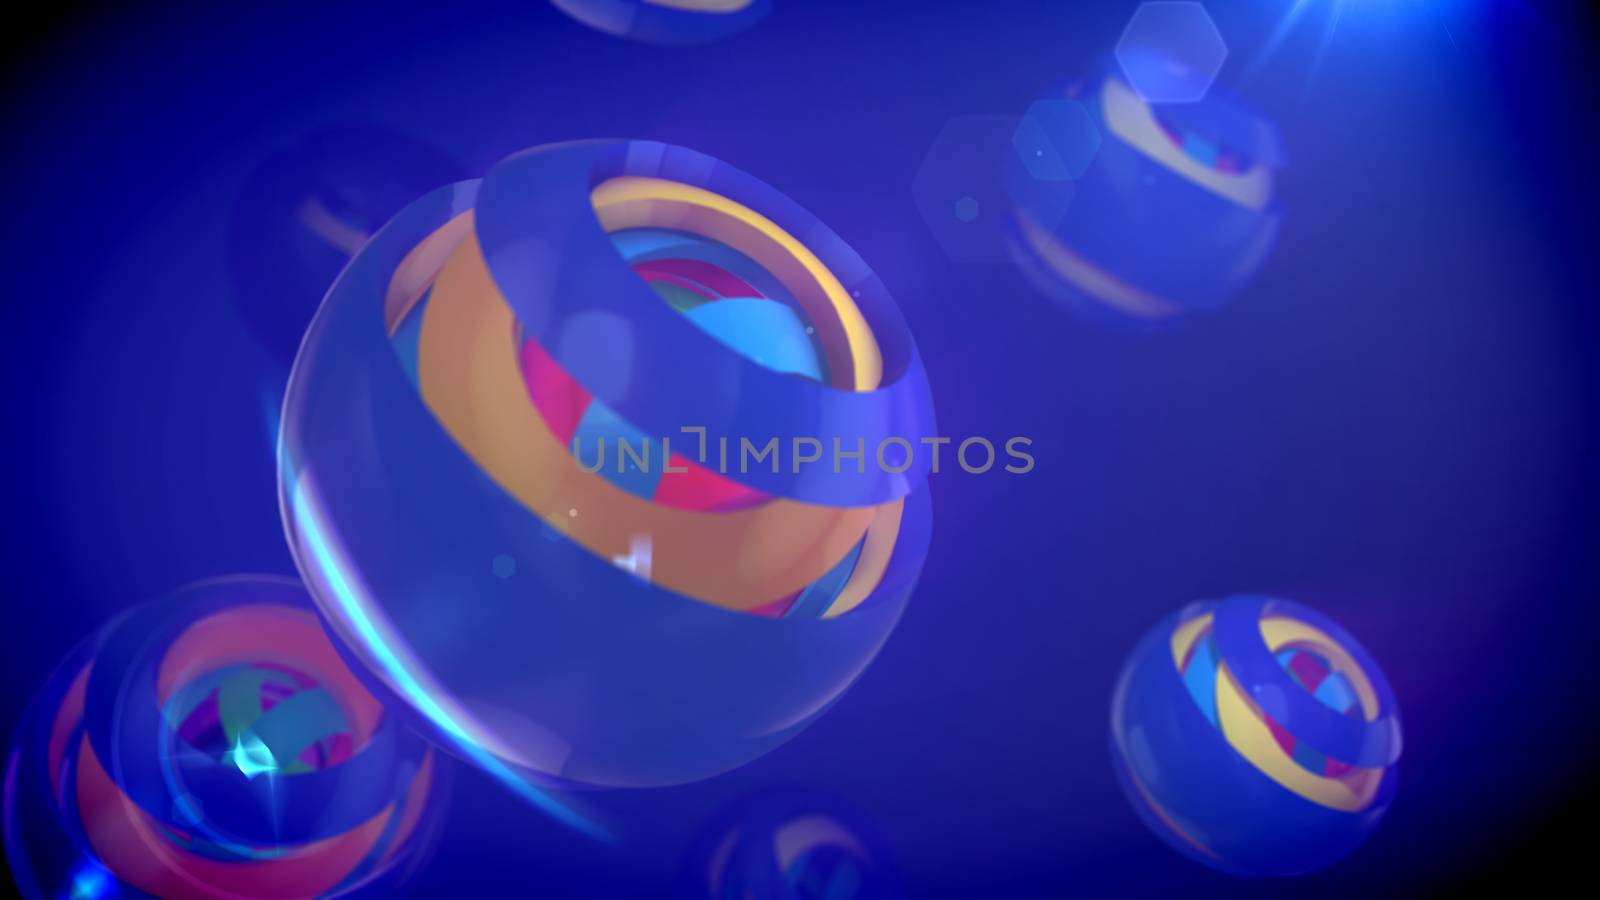 An advanced 3d illustration of nested eye-camera objects of different colors rotating in cup looking semi-spheres in the blue backdrop. They create the mood of optimism and interest.